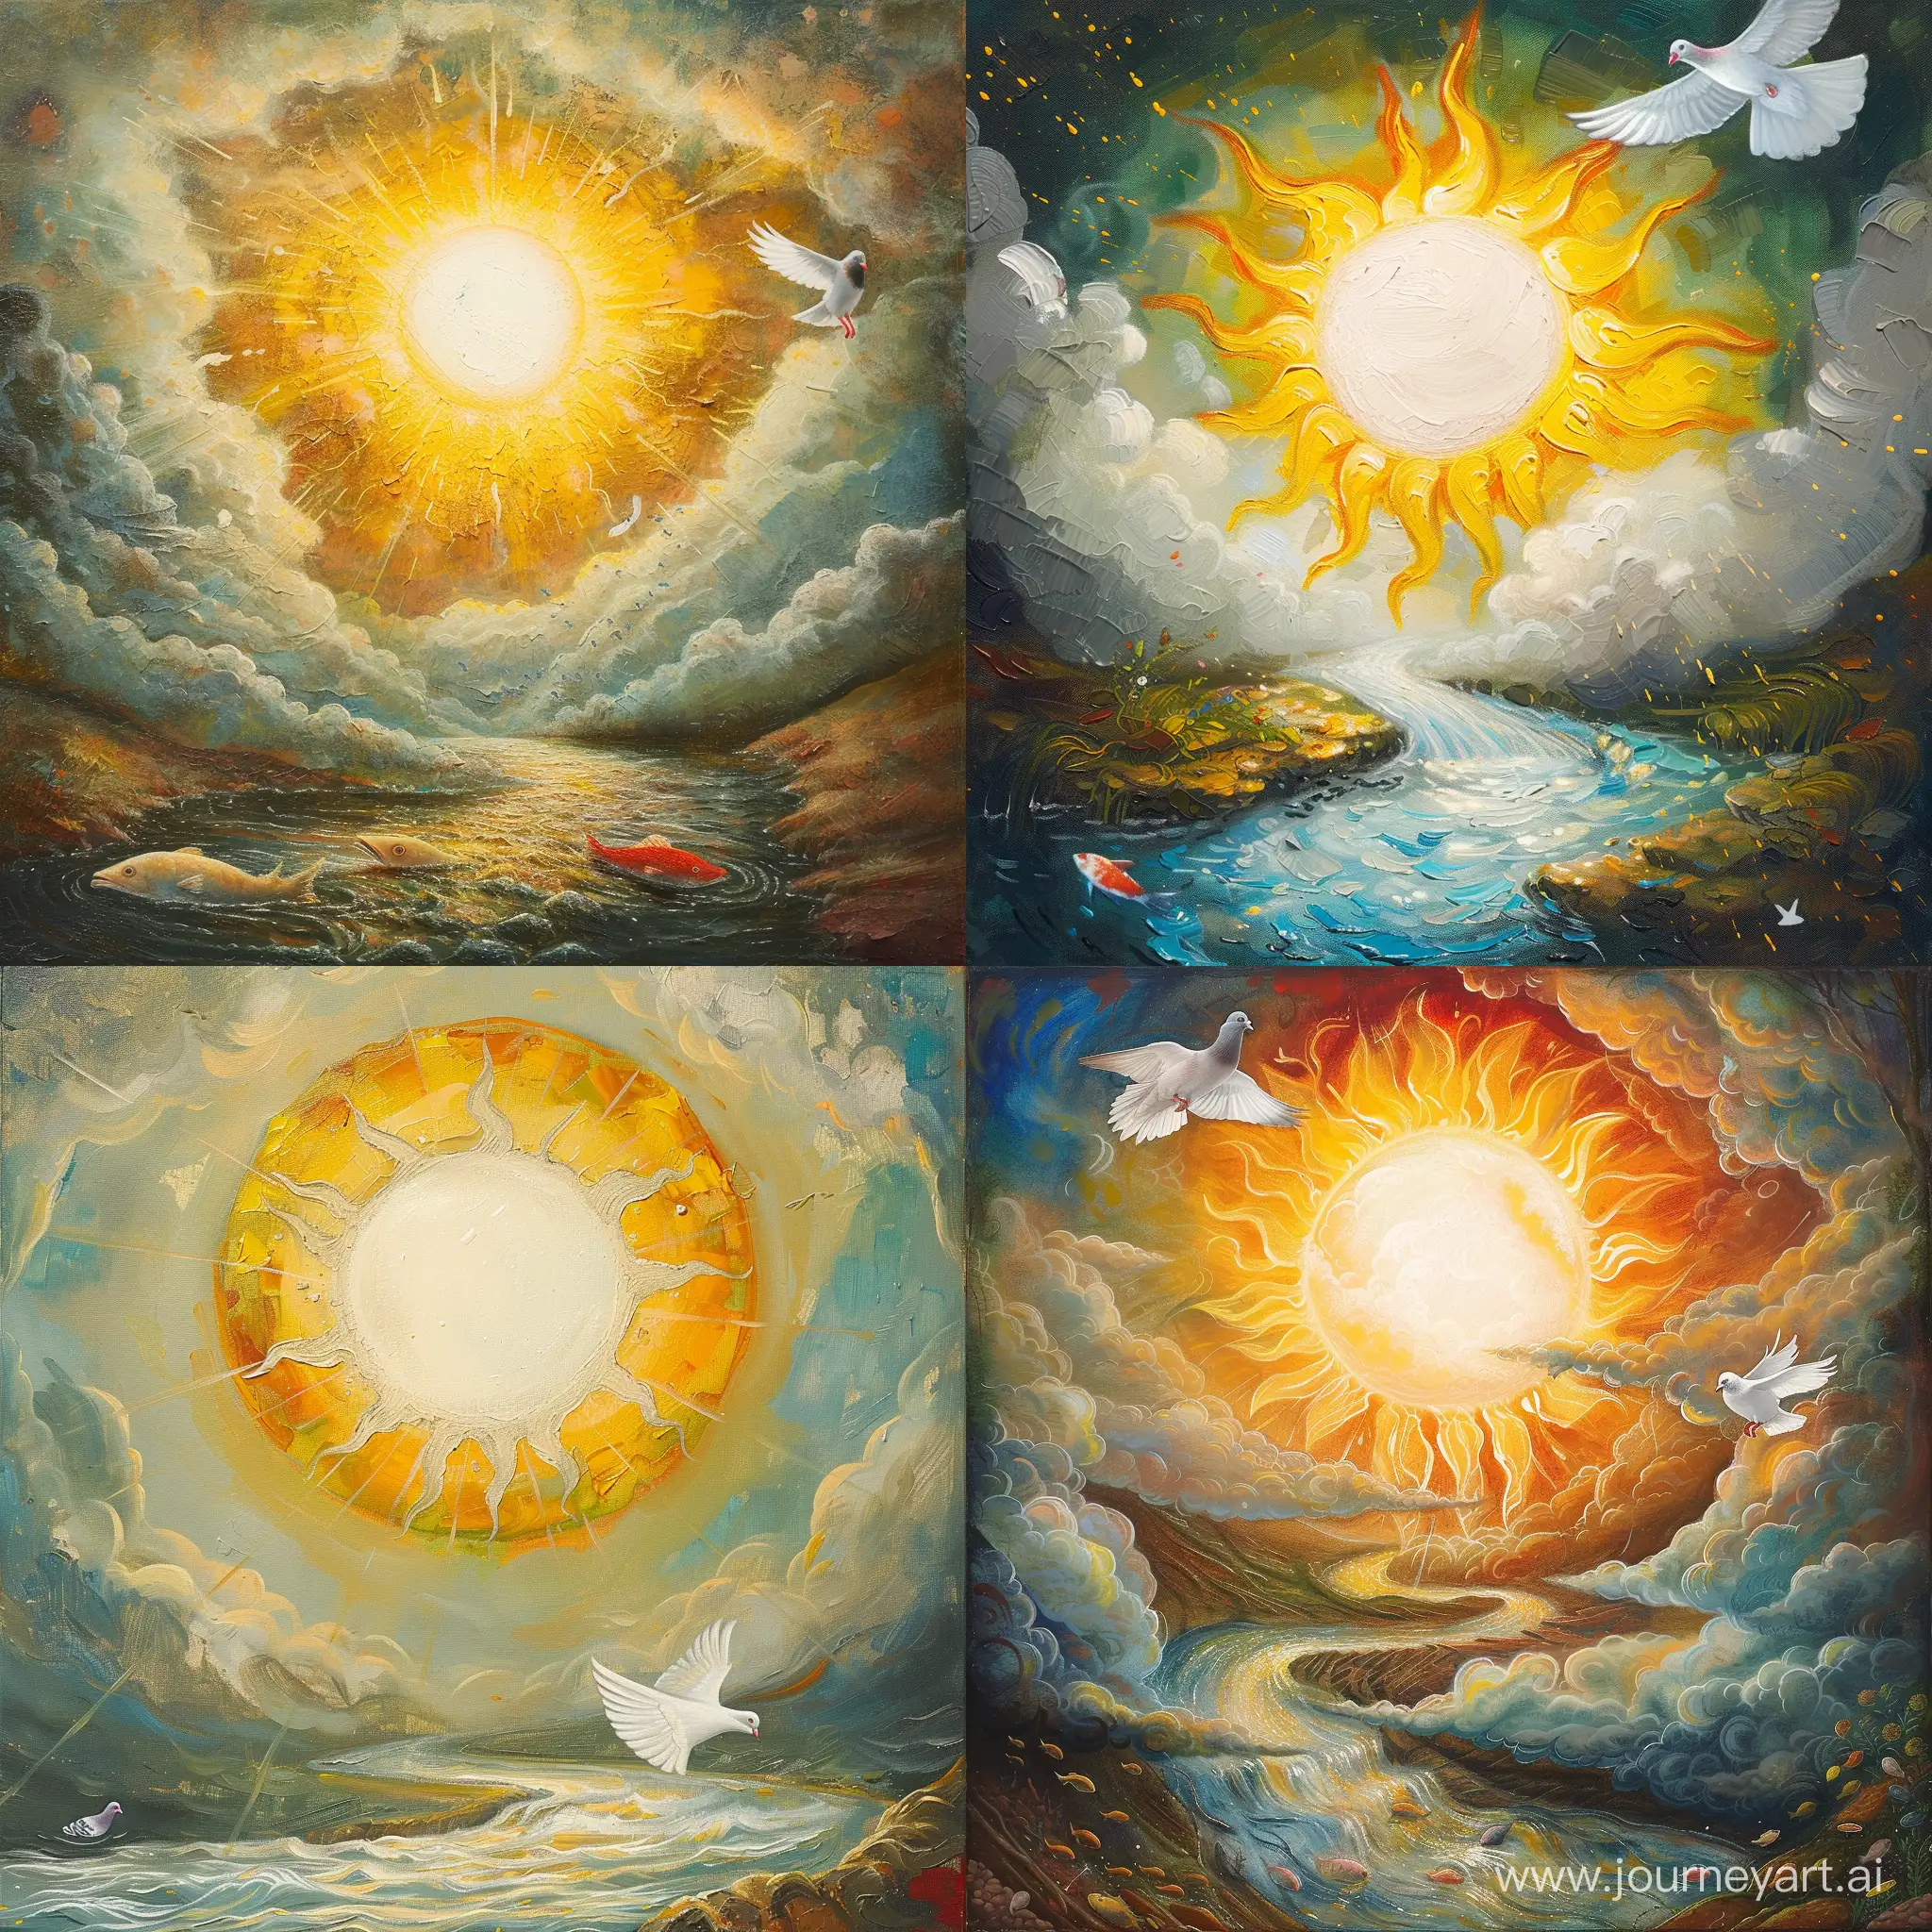 Composition:

The sun should be in the center of the canvas.
The river should flow to the bottom left of the Sun and go deep into the picture.
Clouds should surround the Sun, creating an effect of blurriness and softness.
The fish should be depicted floating along the river.
The pigeon should be depicted flying from the top right of the Sun and be white.
Lighting:

The sun should be bright and slightly blurred to convey its radiance and make it the center of attention.
Lighting should come from the Sun with light rays radiating around it.
Different parts of the landscape should be illuminated with different degrees of brightness to create a play of light and shadow.
The color palette:

Use bright and saturated colors typical of the impressionistic style to convey the emotional tone of the landscape.
The sun should be depicted in yellow or orange to emphasize its warmth and radiance.
The water of the river can be depicted in blue or green shades.
Clouds should have different shades of white and gray to create an effect of volume and lightness.
Fish and pigeon can be depicted using a variety of colors to make them more expressive.
Technic:

To create texture and brushstroke effect, use a brush with soft and blurred edges typical of the impressionistic style.
Add some details to convey the observation of the details of the landscape, characteristic of the impressionistic style.